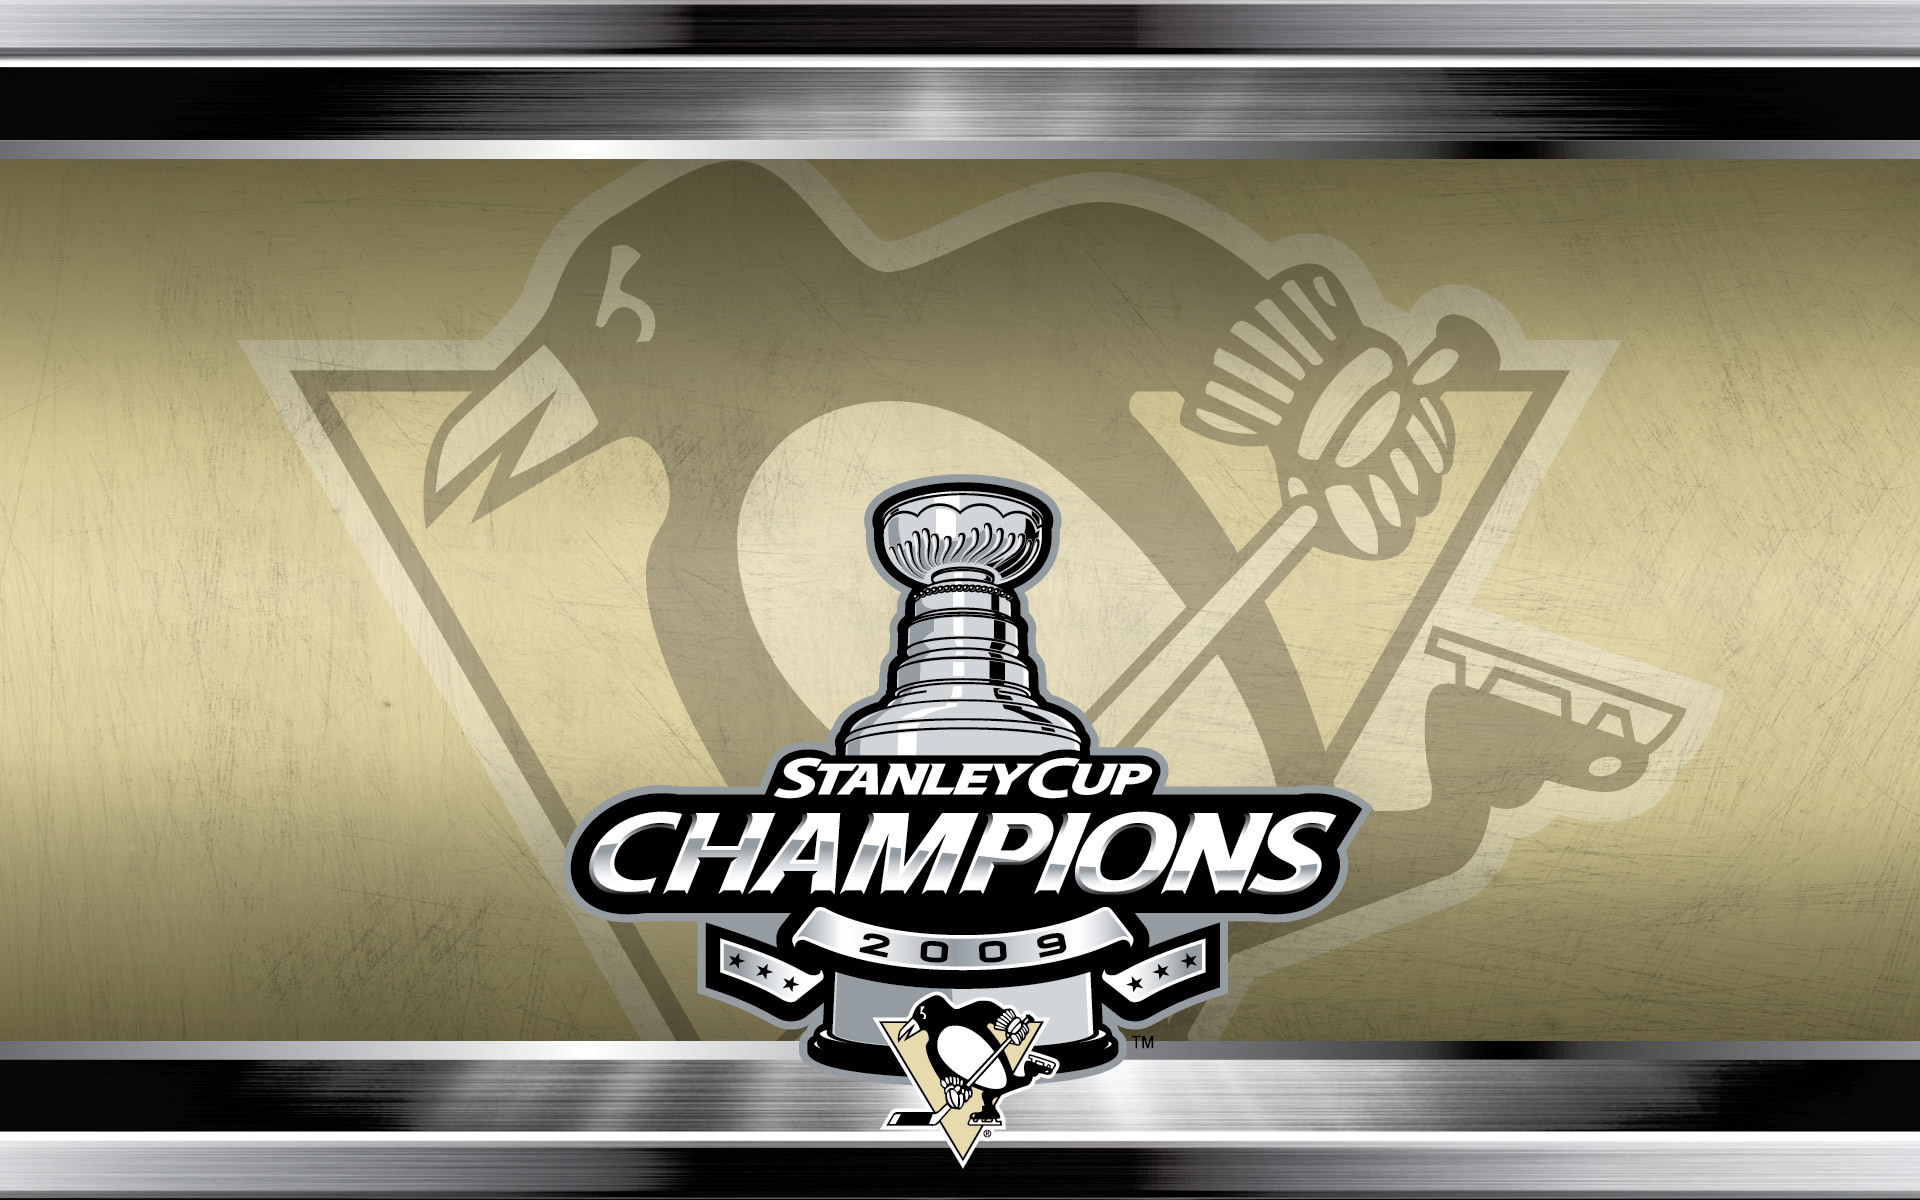 1920x1200 2008-09 Stanley Cup Champions Pittsburgh Penguins Wallpaper (19197503) Fanpop Page 13